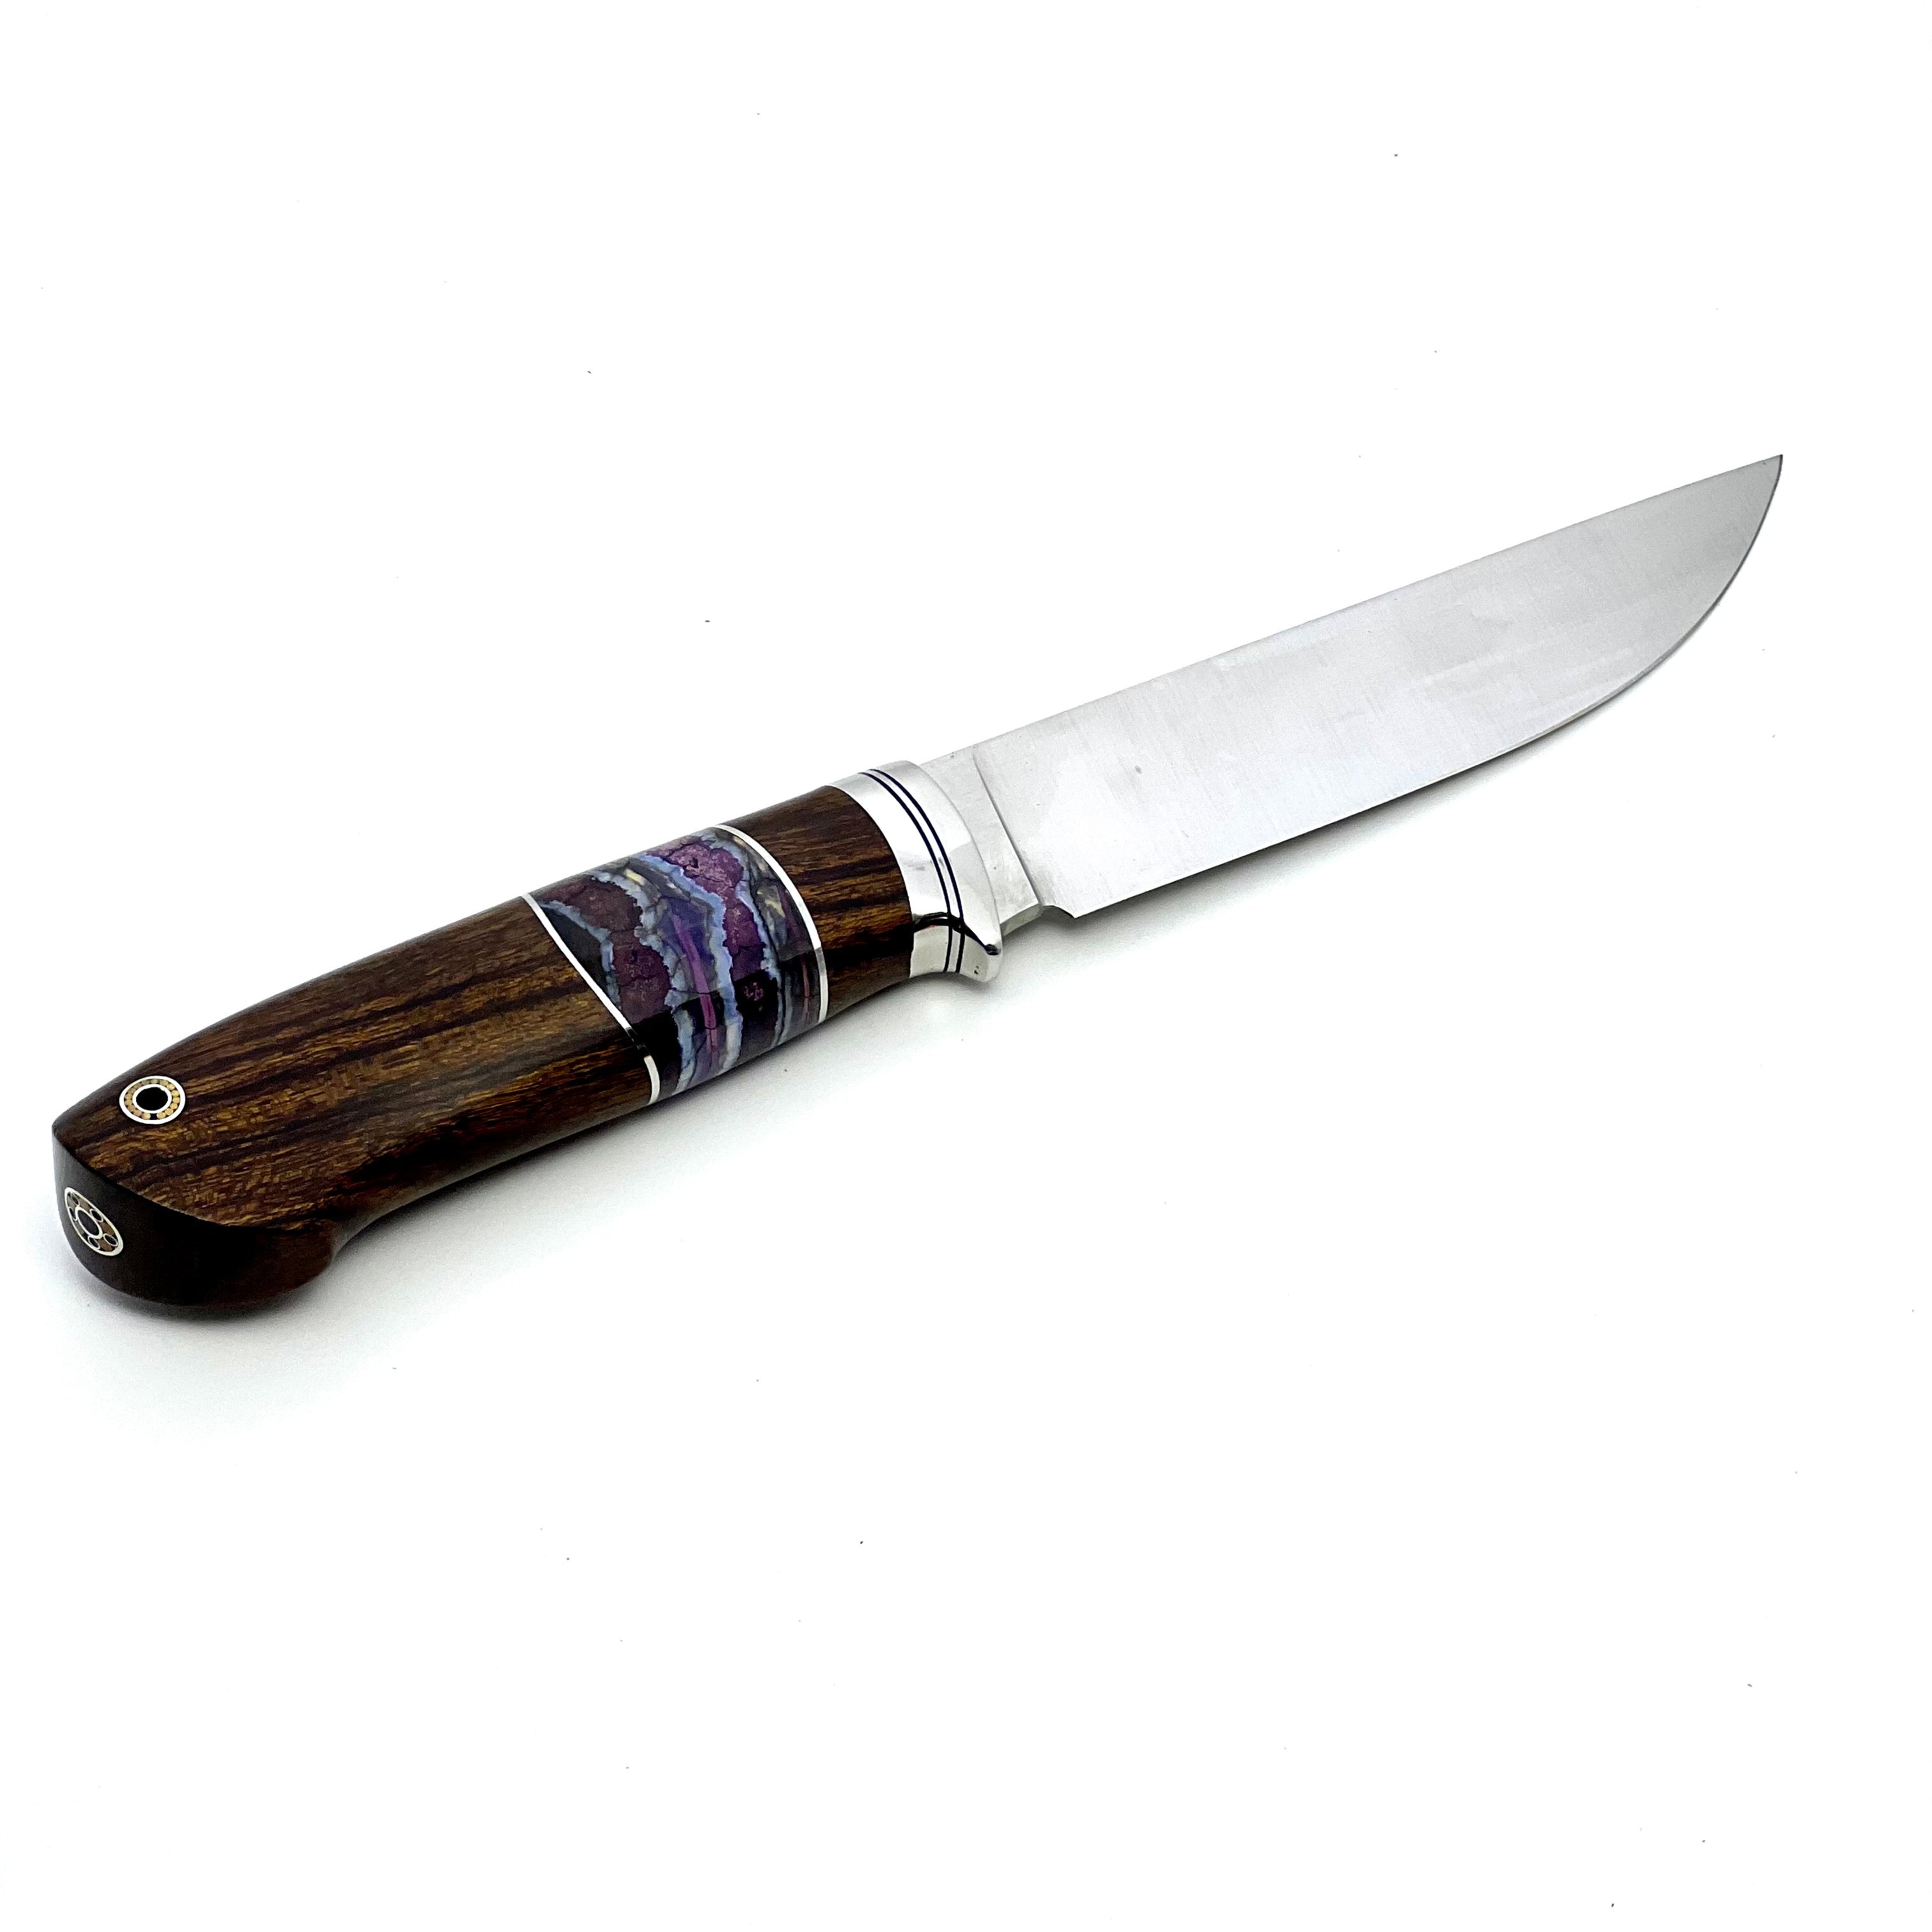 CPM® REX® 121 Steel Hunting Knife with Ironwood Handle and Mammoth Tusk